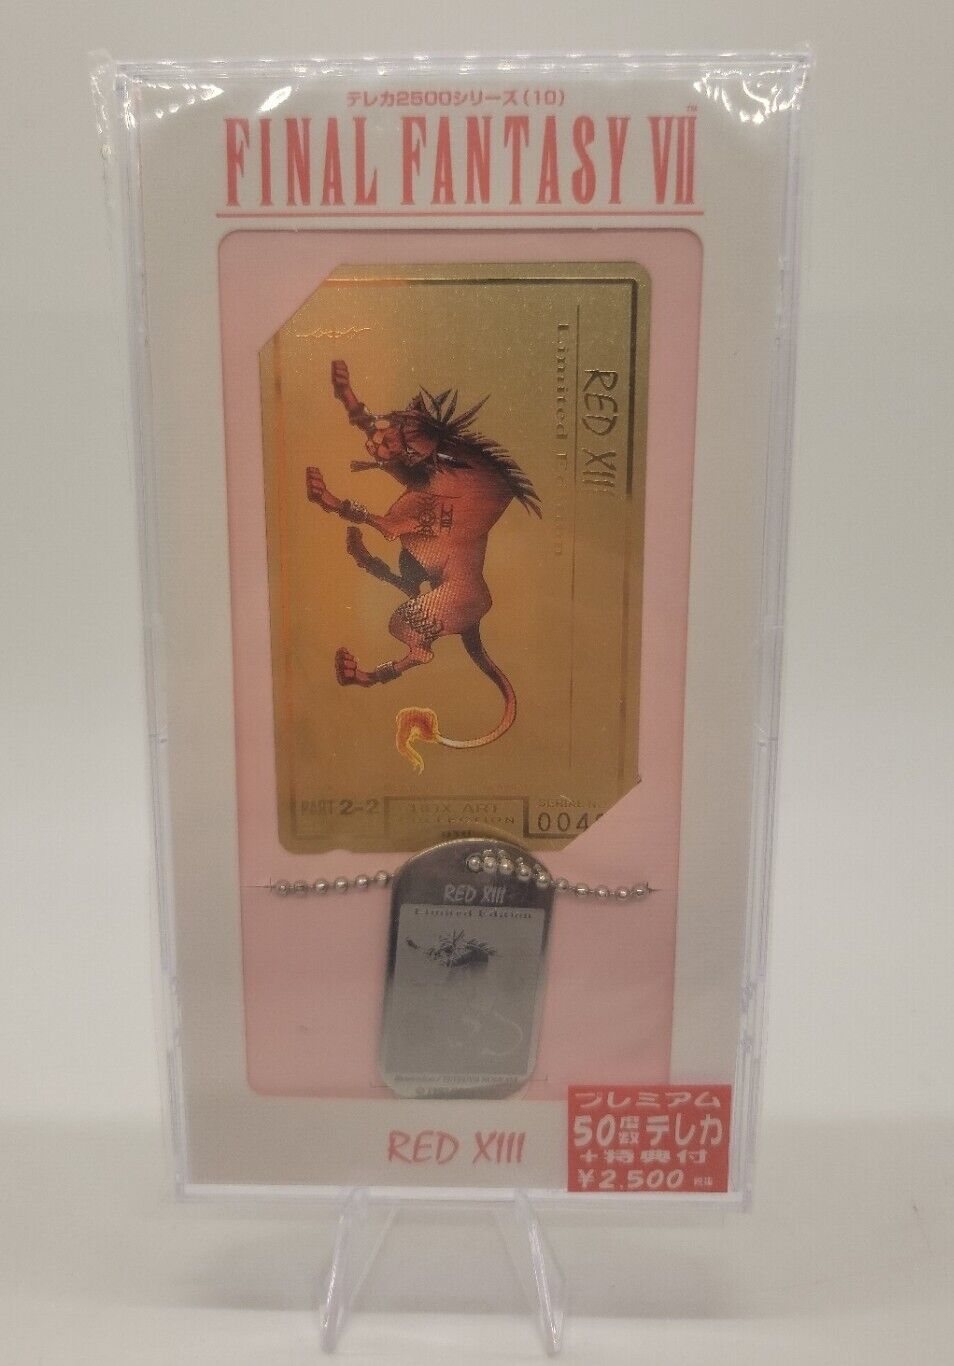 Vintage 1997 Final Fantasy VII 7 Red XIII Gold Telephone Phone Card + Dog Tag